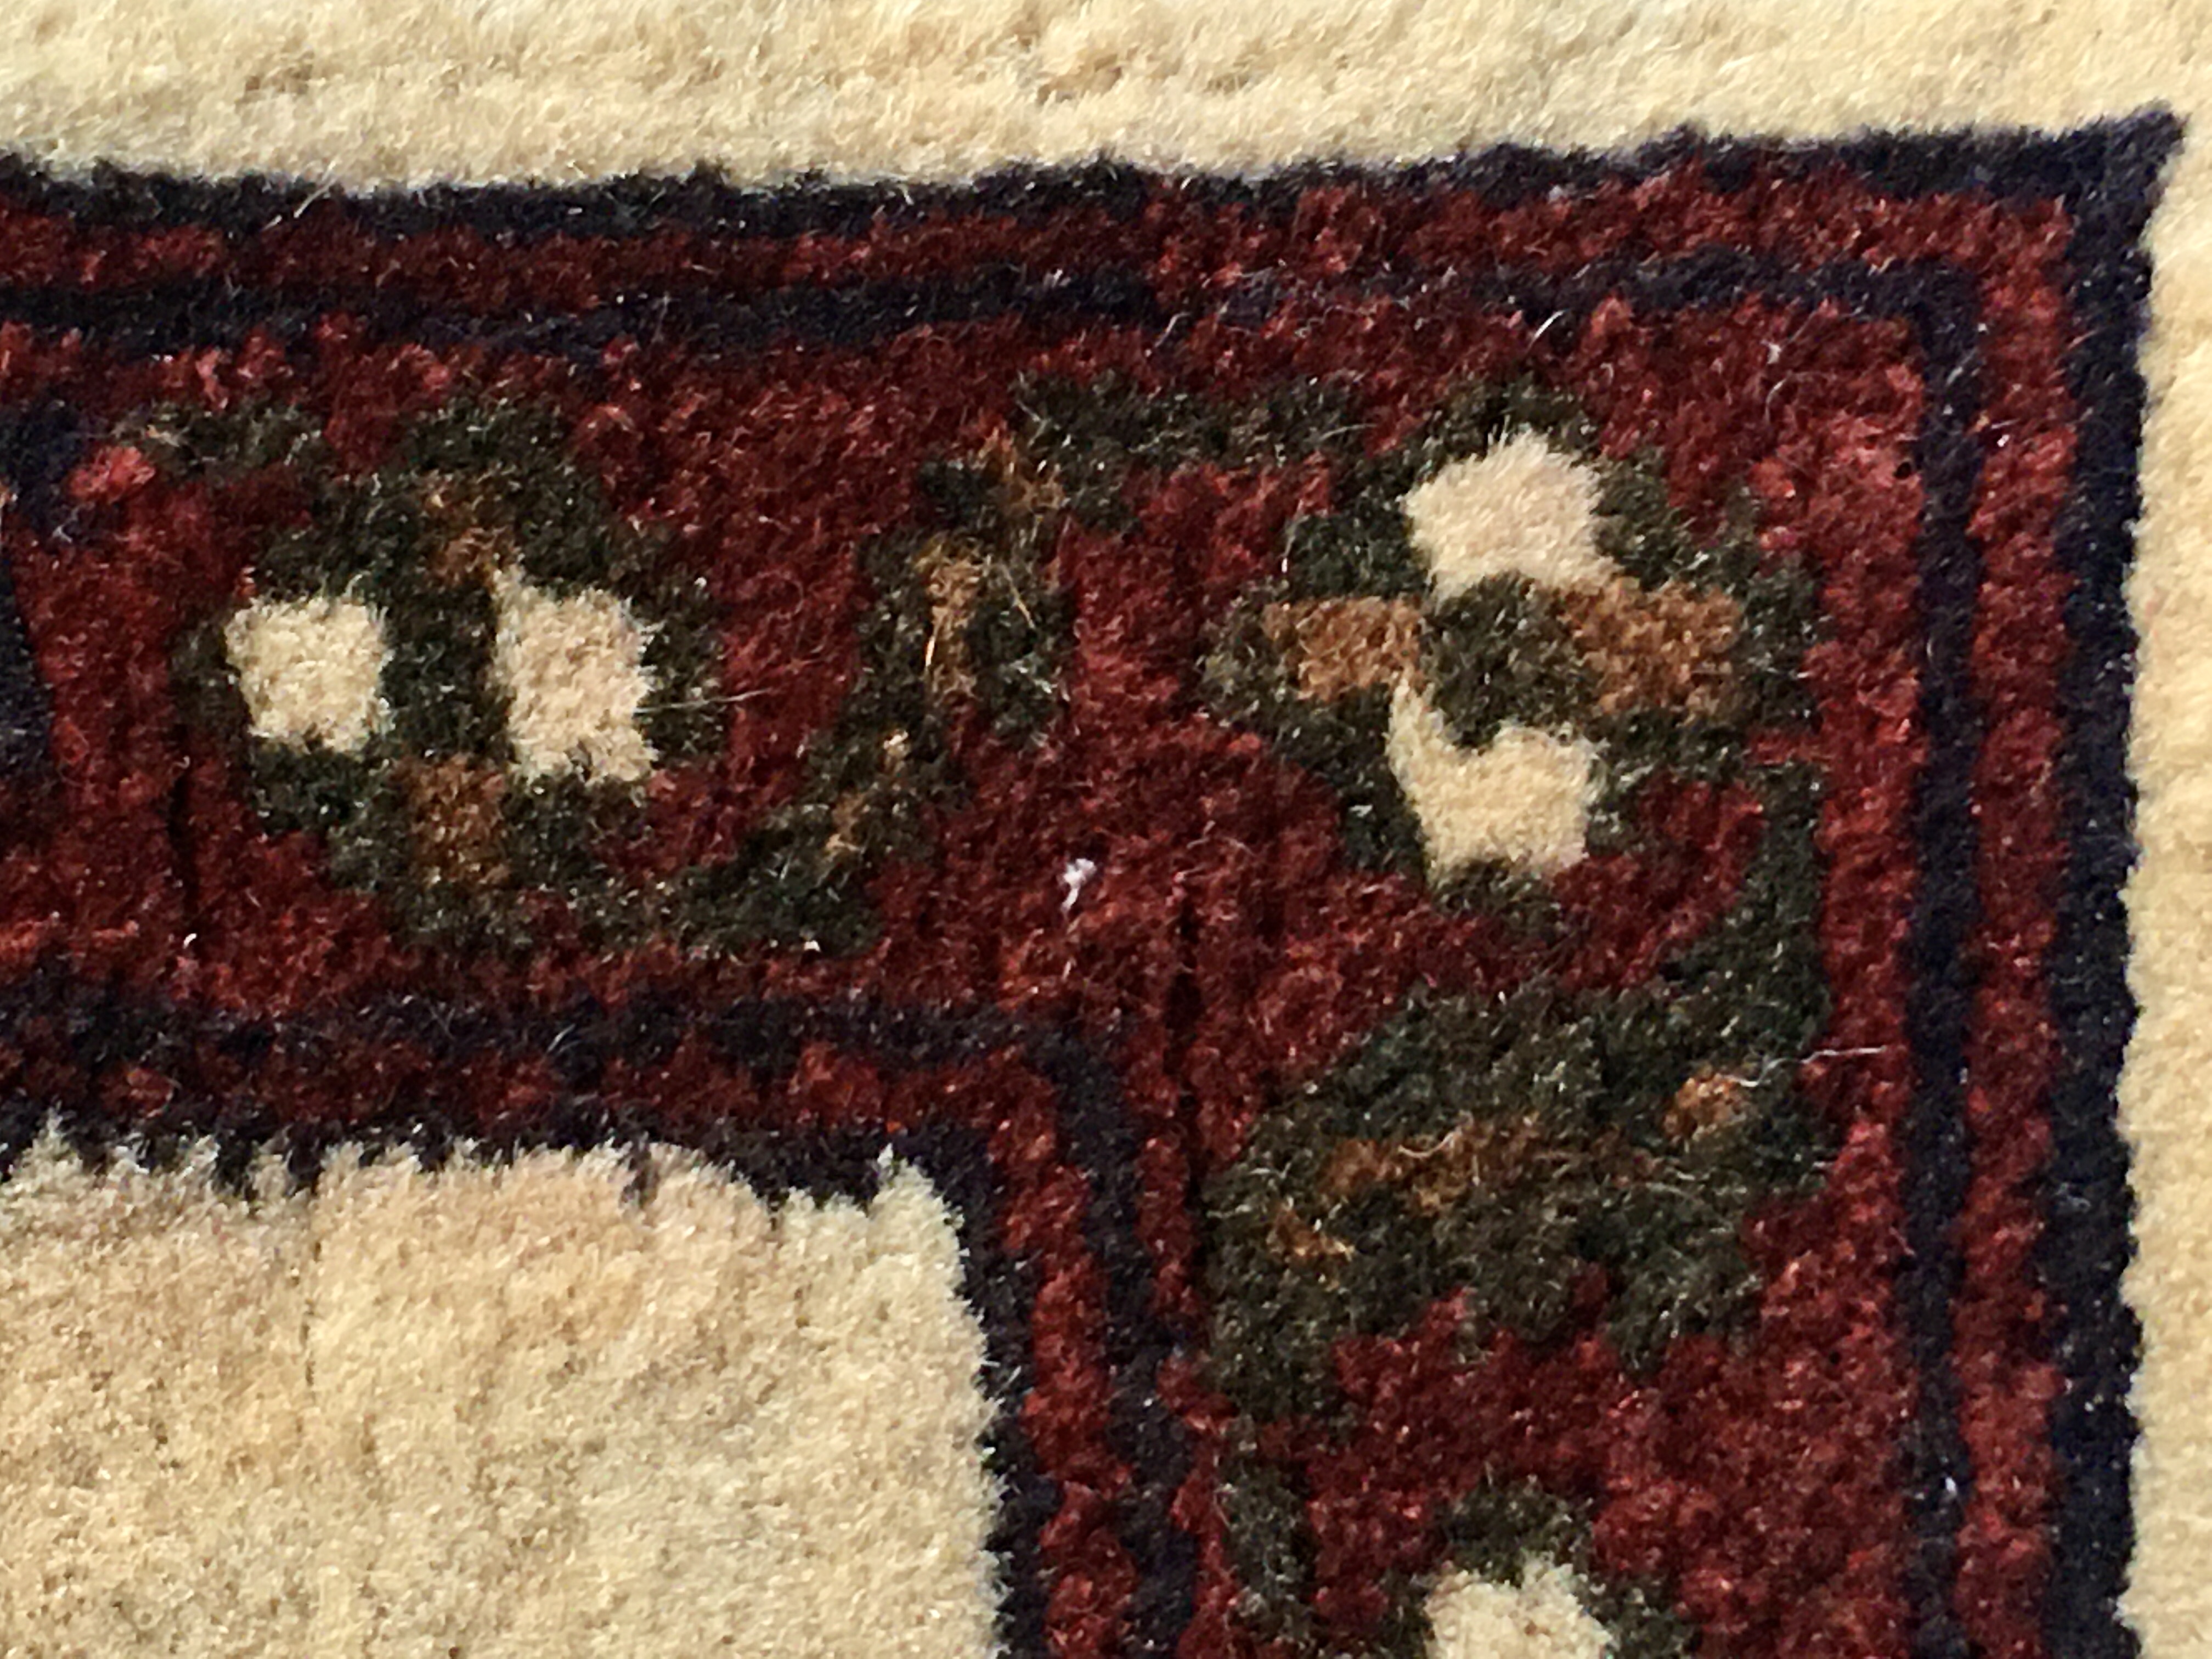 Detail of the rug's corner join